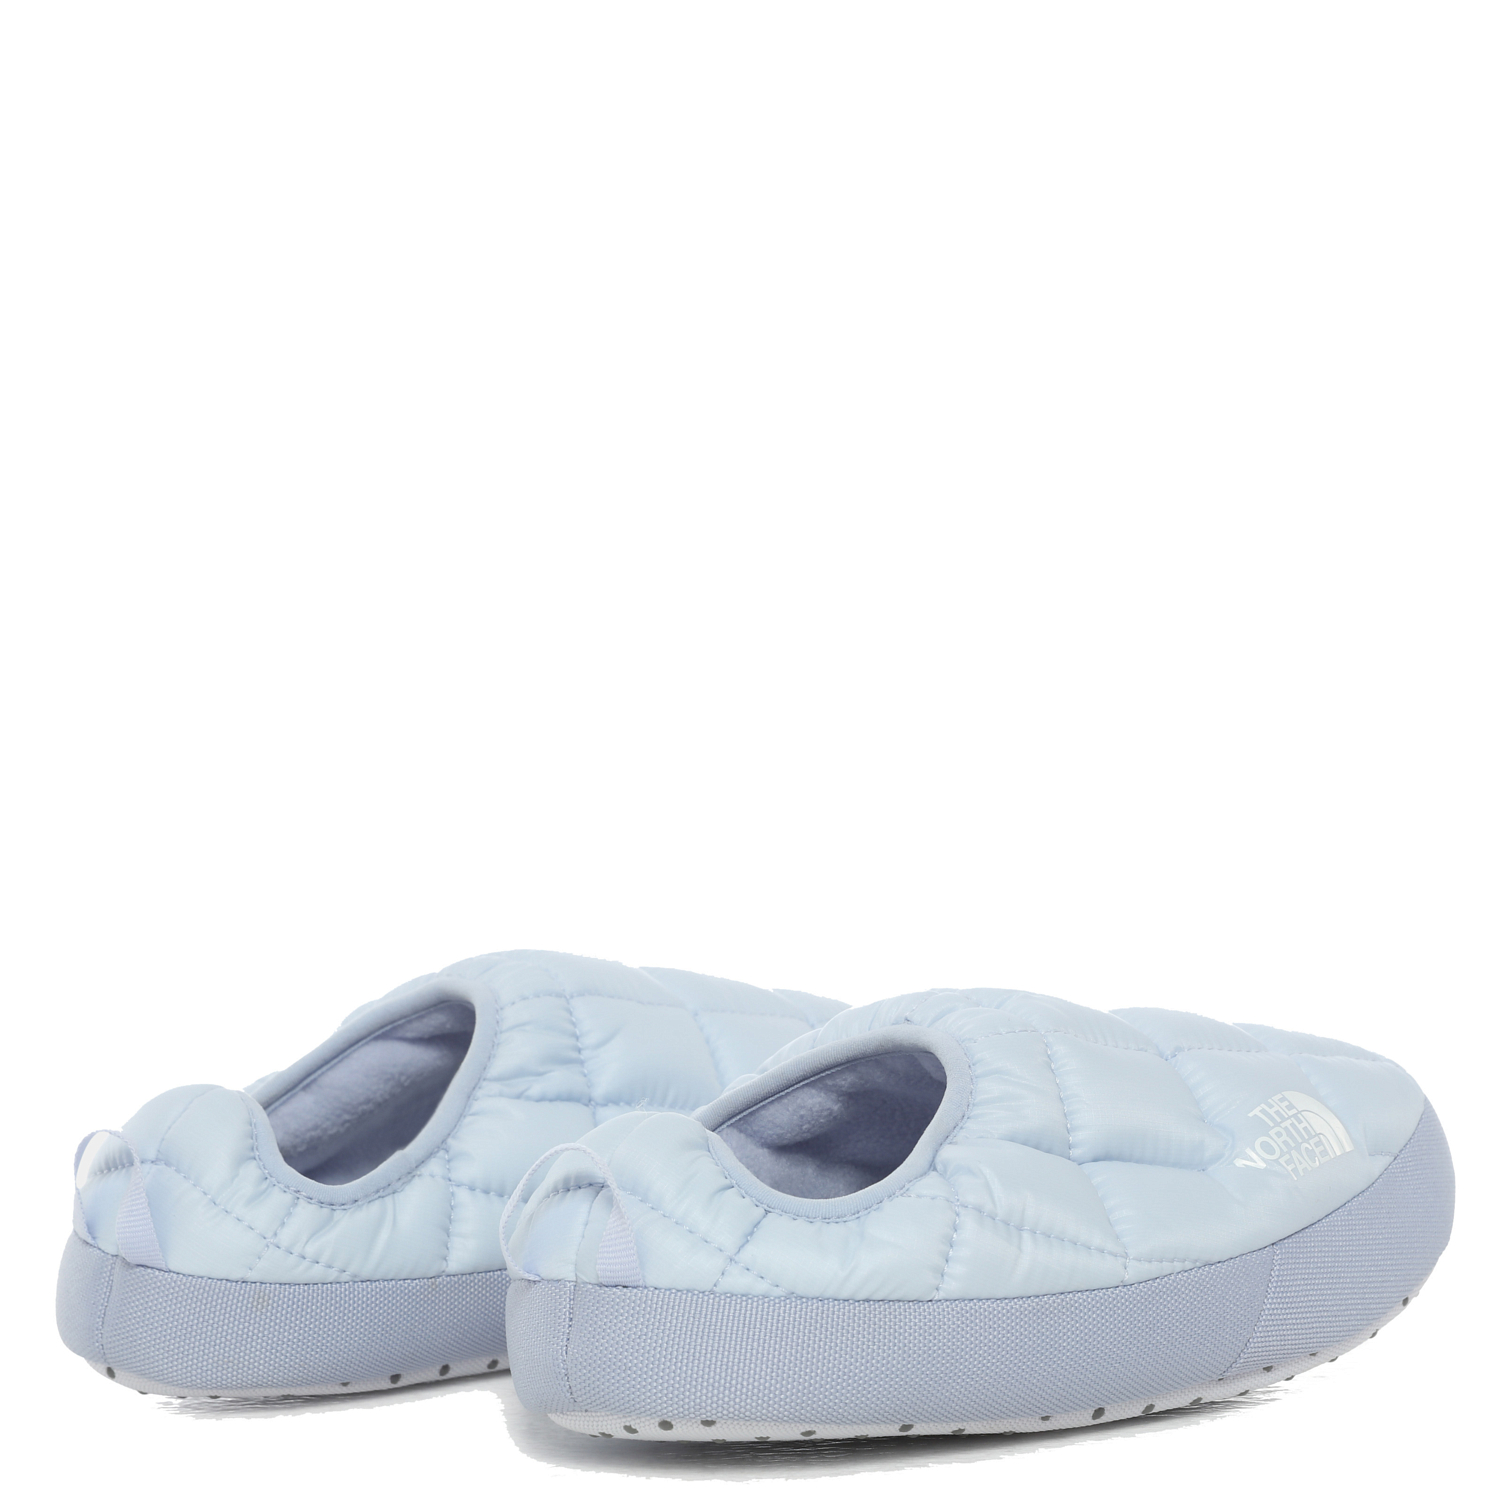 Тапки The North Face Thermoball Tent Mule V Mist Blue/Tnf White